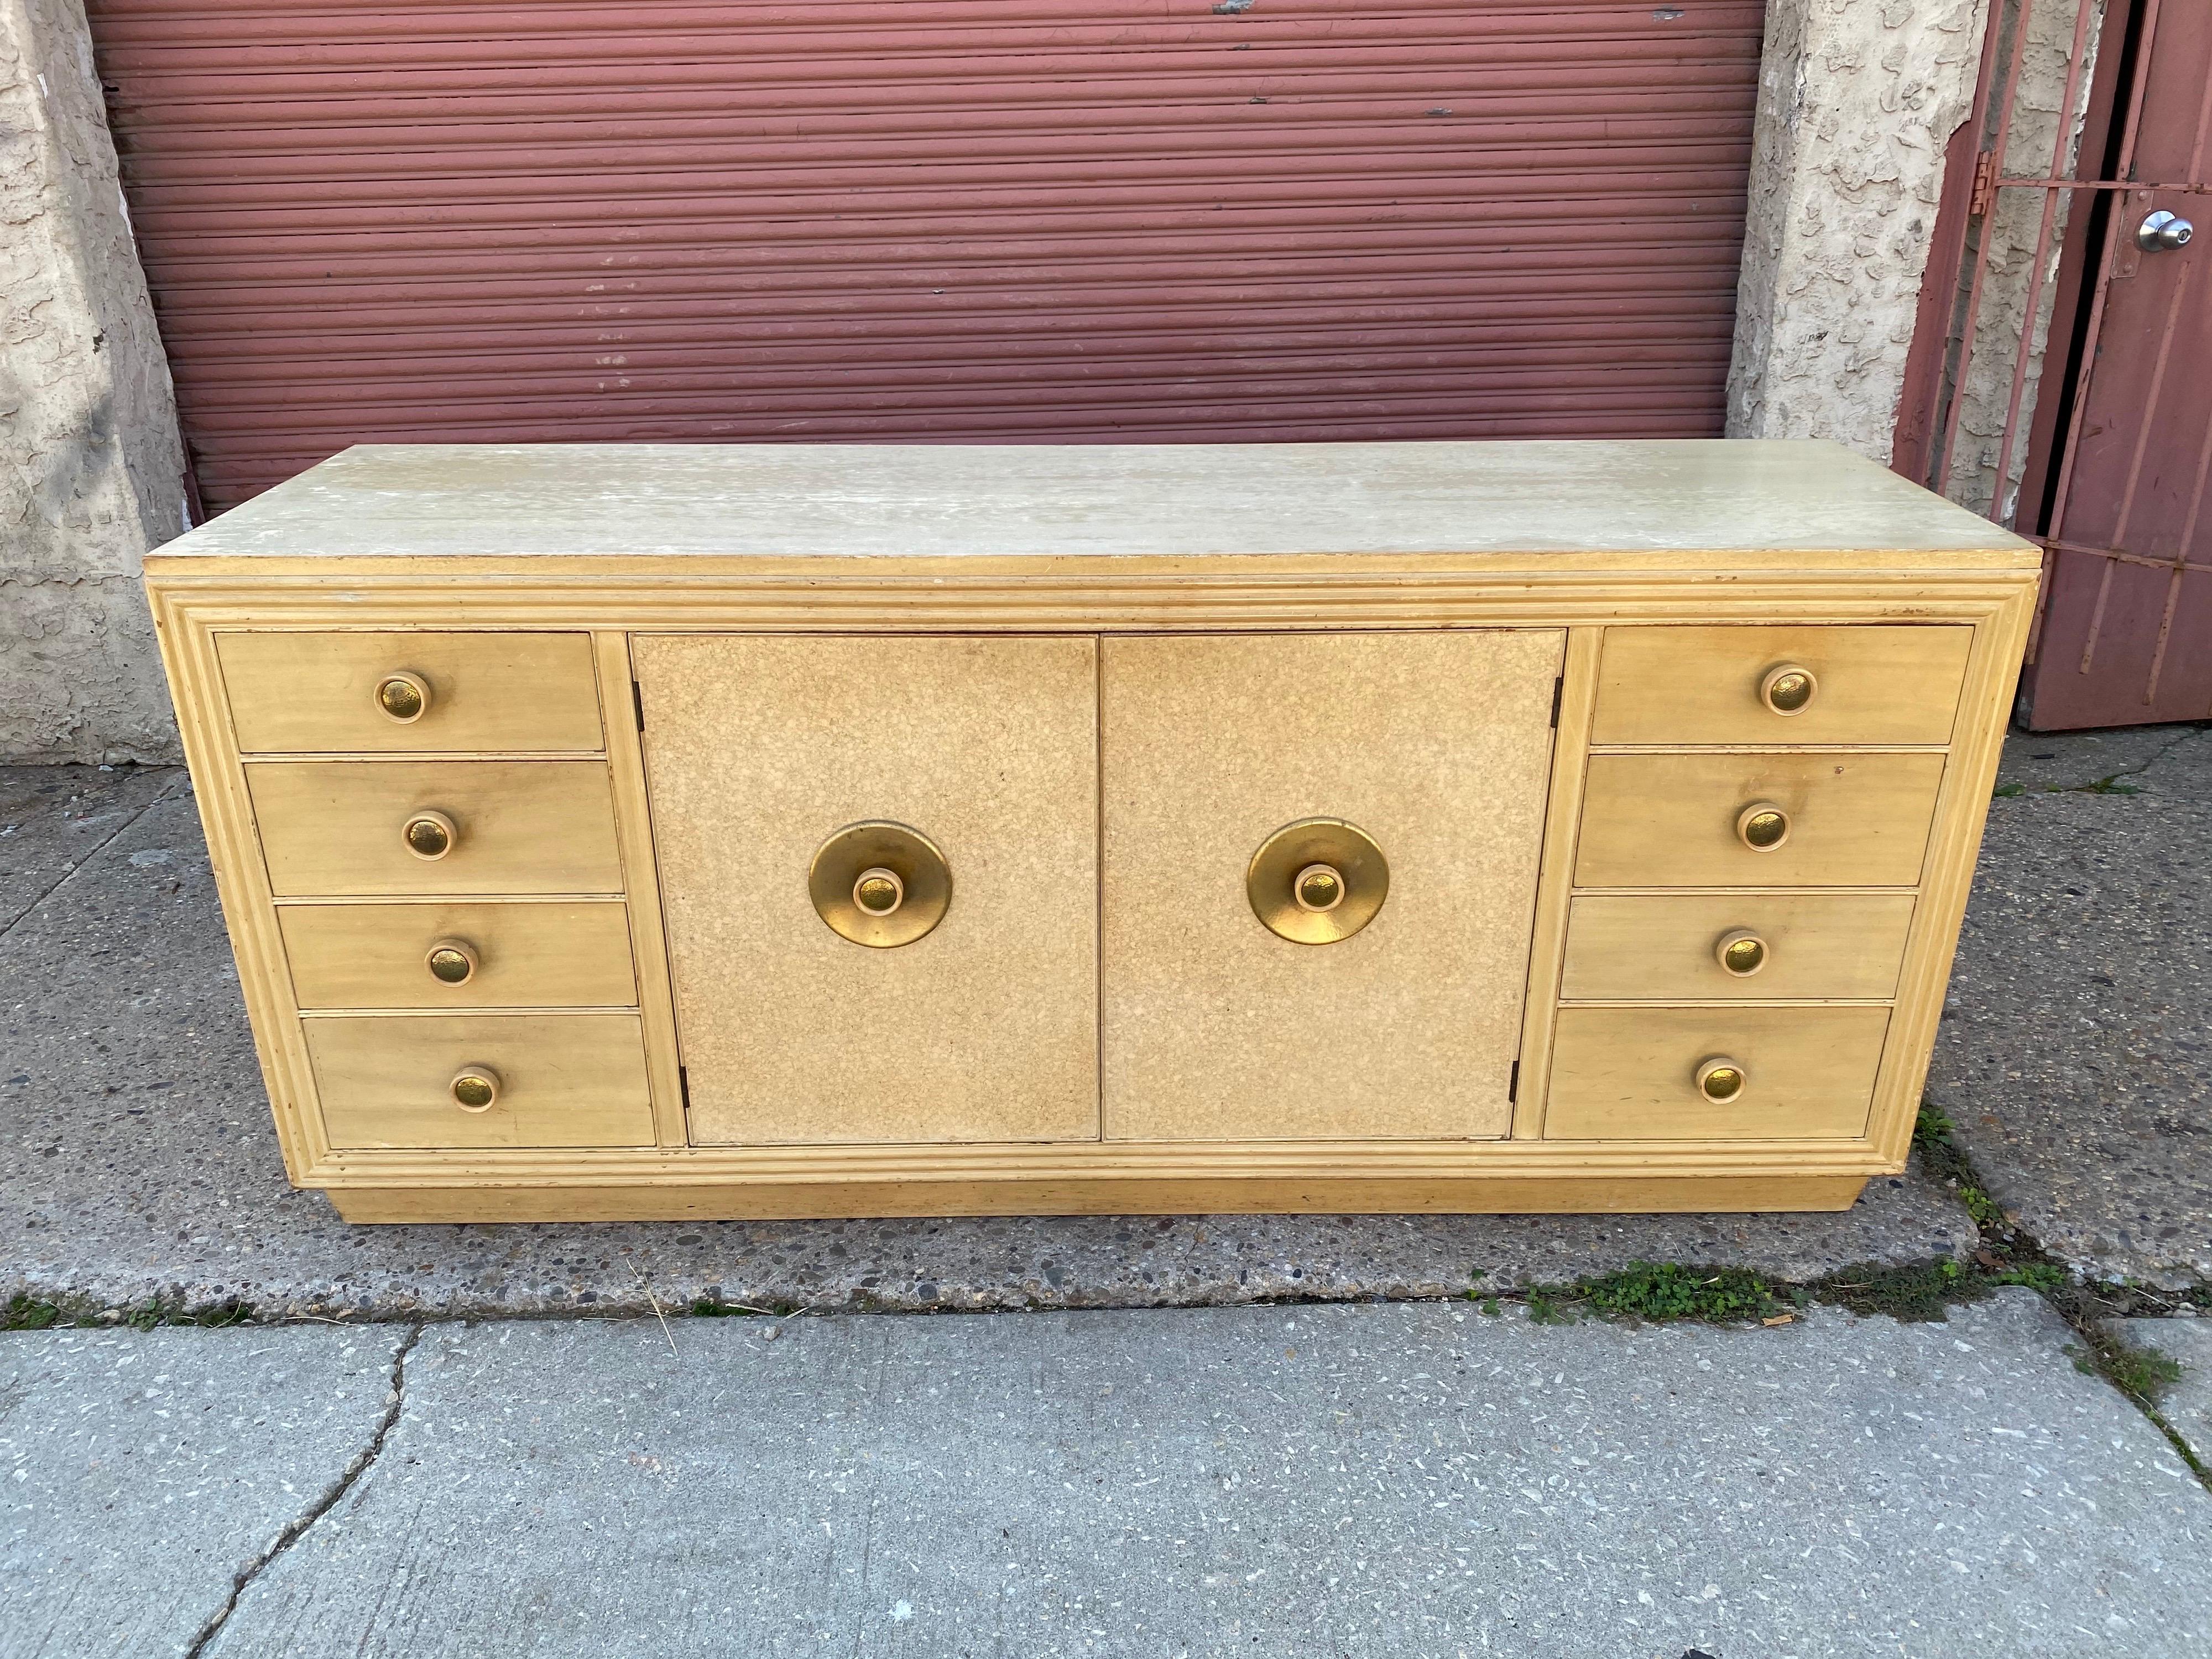 Paul Frankl cork front credenza or buffet. All original! Needs to be refinished, but you can decide how! Loads of storage, doors open to reveal pull out drawers. Use in the dining room, bedroom or anywhere! Very solid and no veneer damage, just